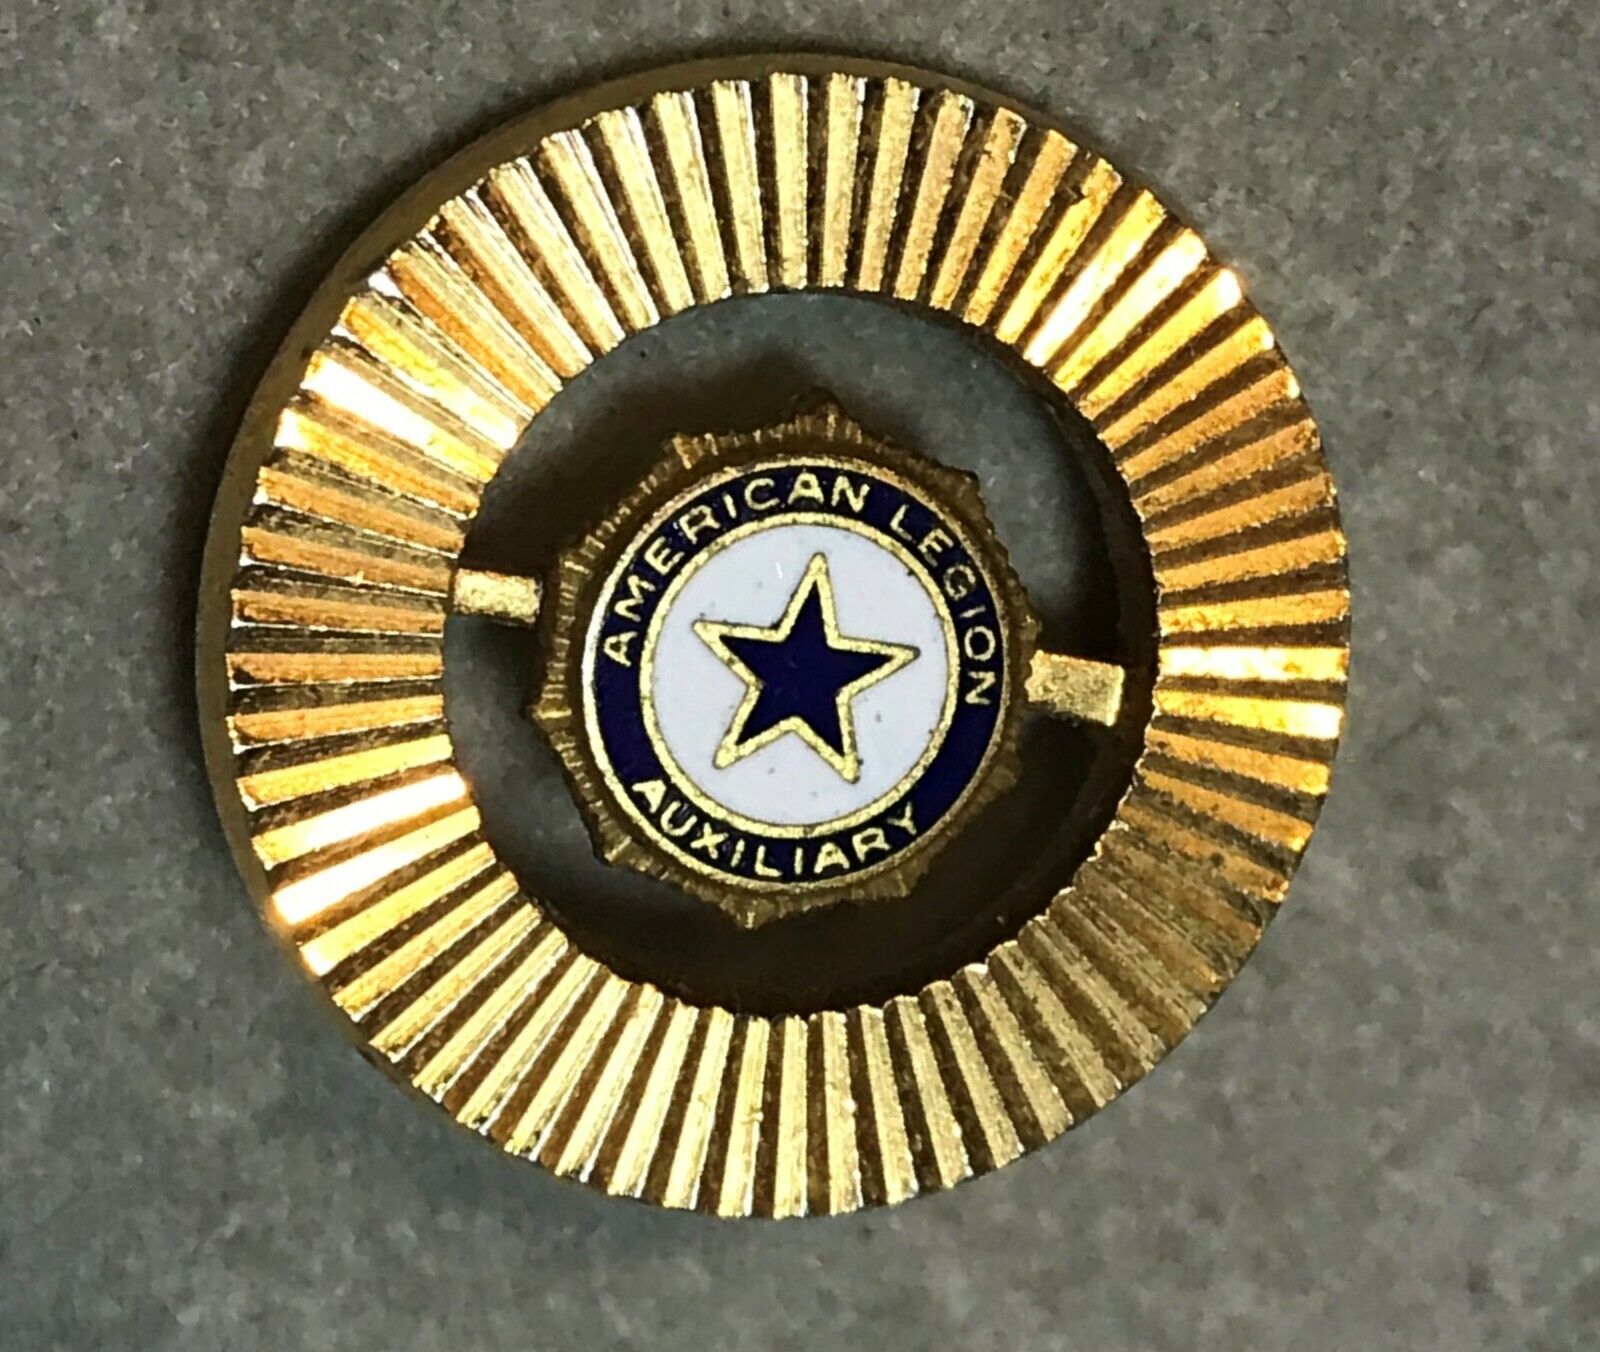 VINTAGE PIN US AMERICAN LEGION AUXILARY Gold Tone 3/4